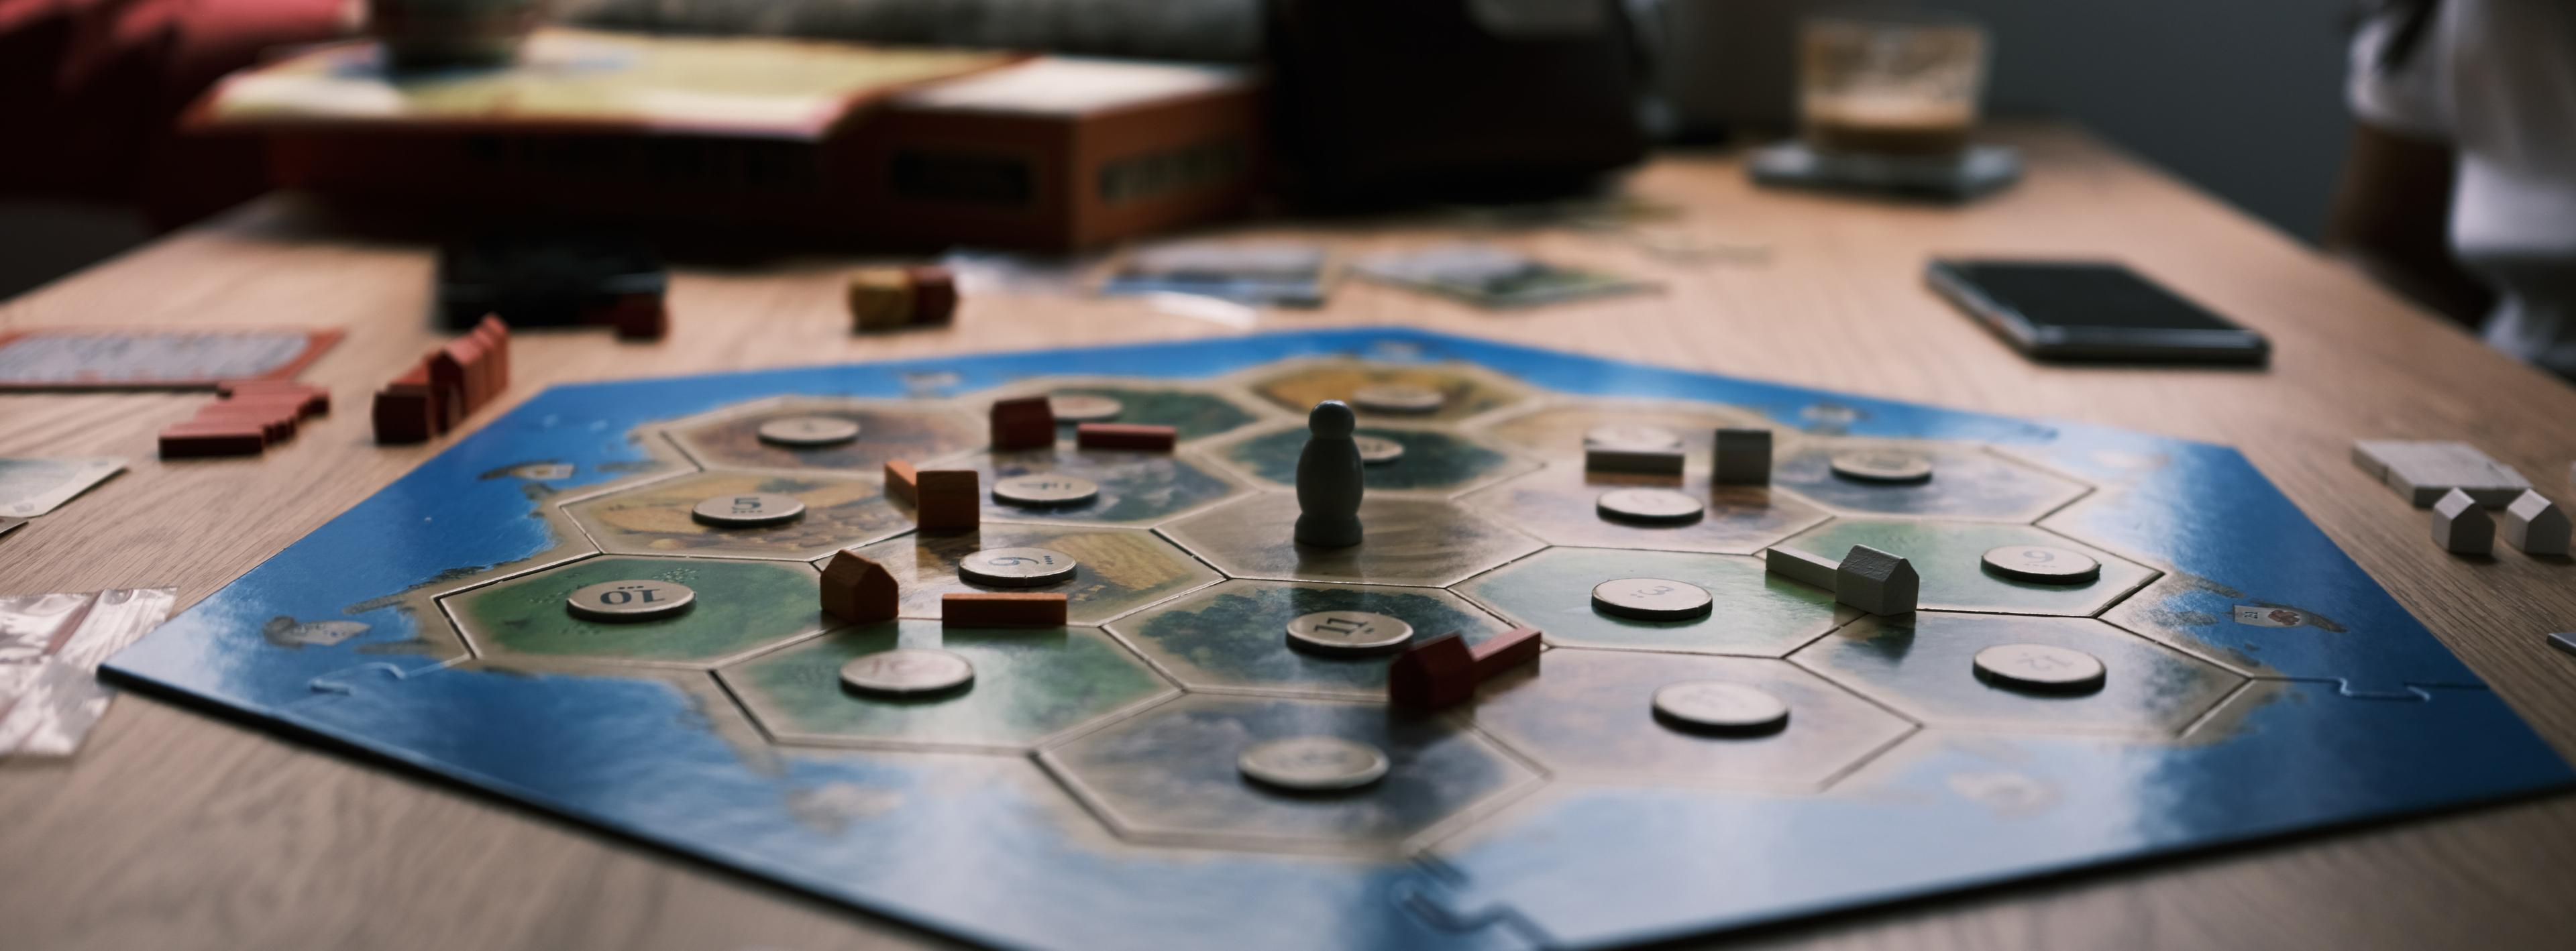 A photograph of the boardgame Catan.